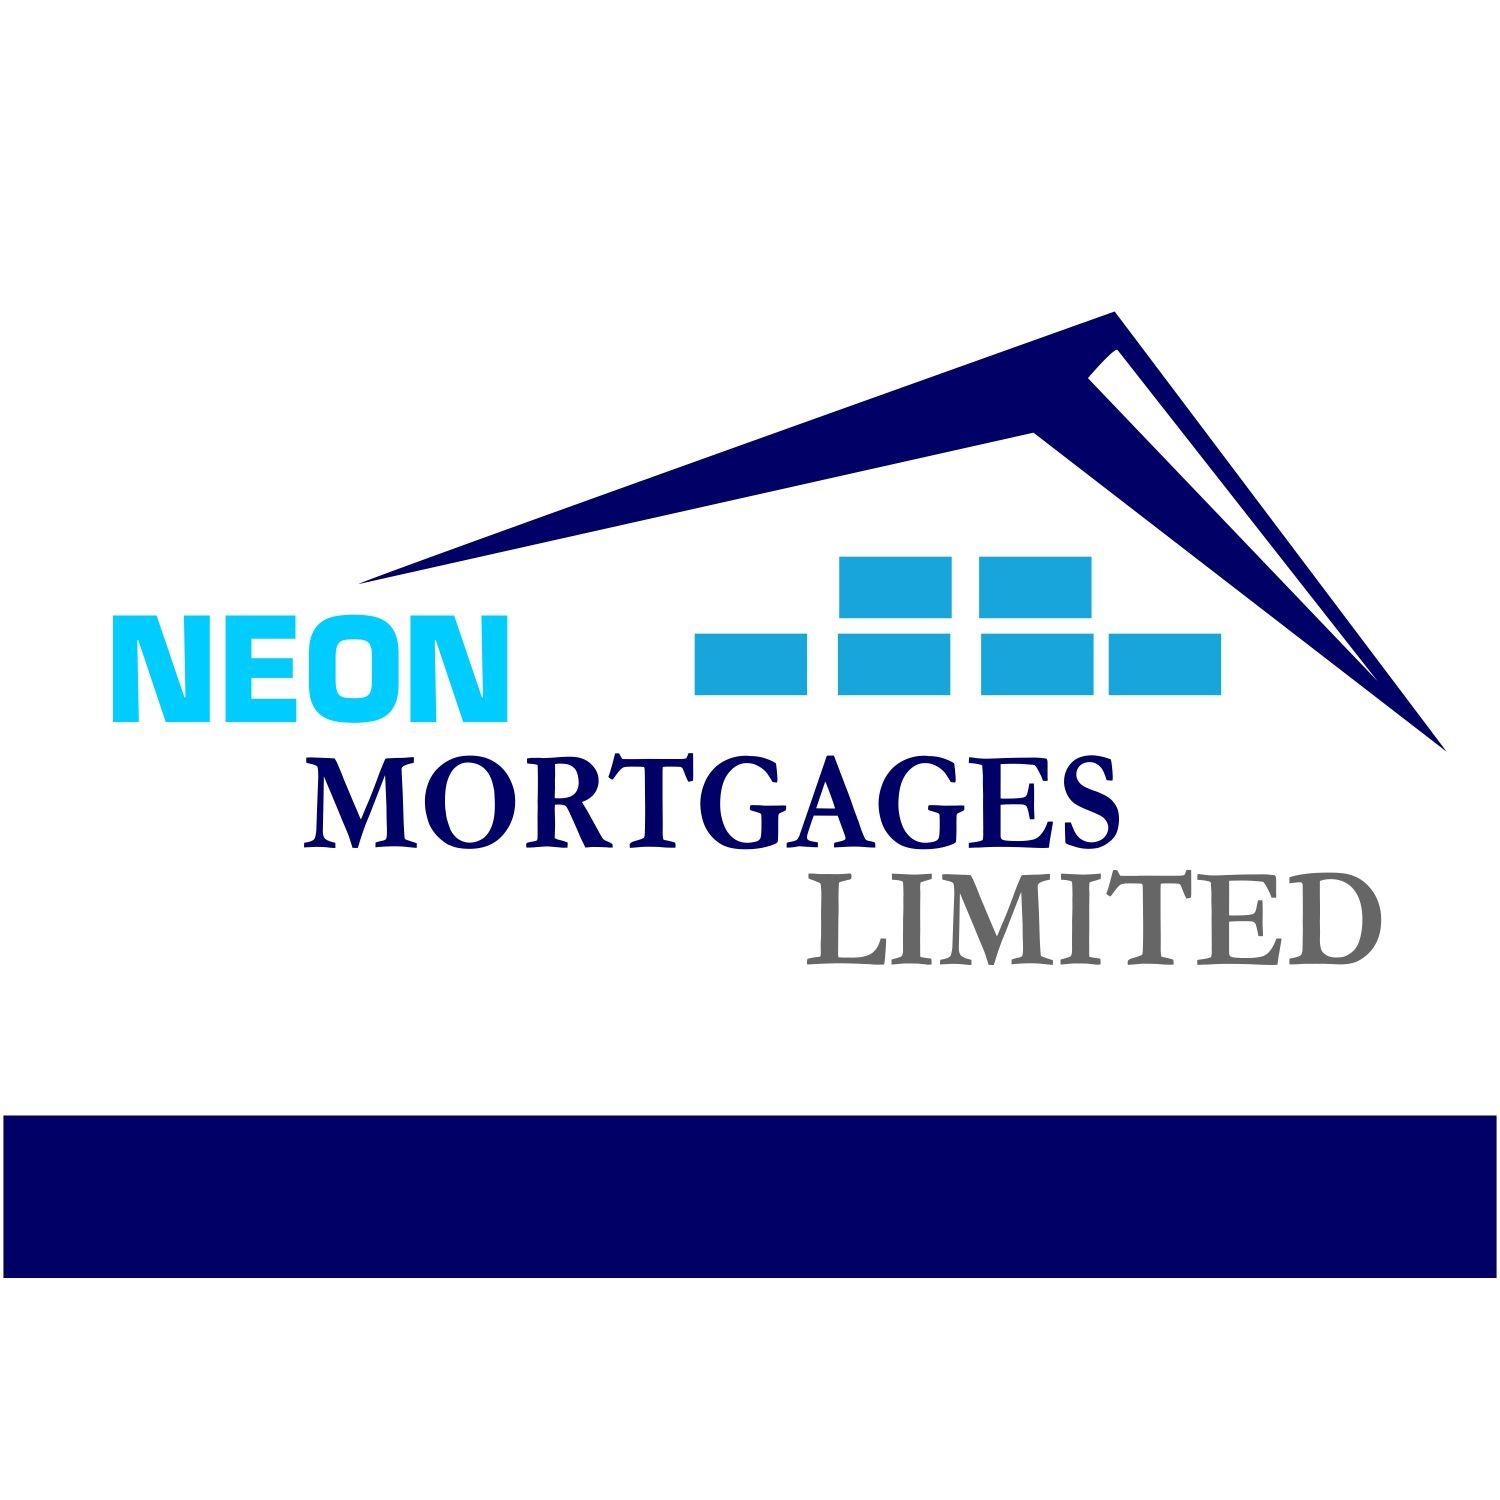 Neon Company Logo - Elegant, Modern, It Company Logo Design for Neon Mortgages limited ...